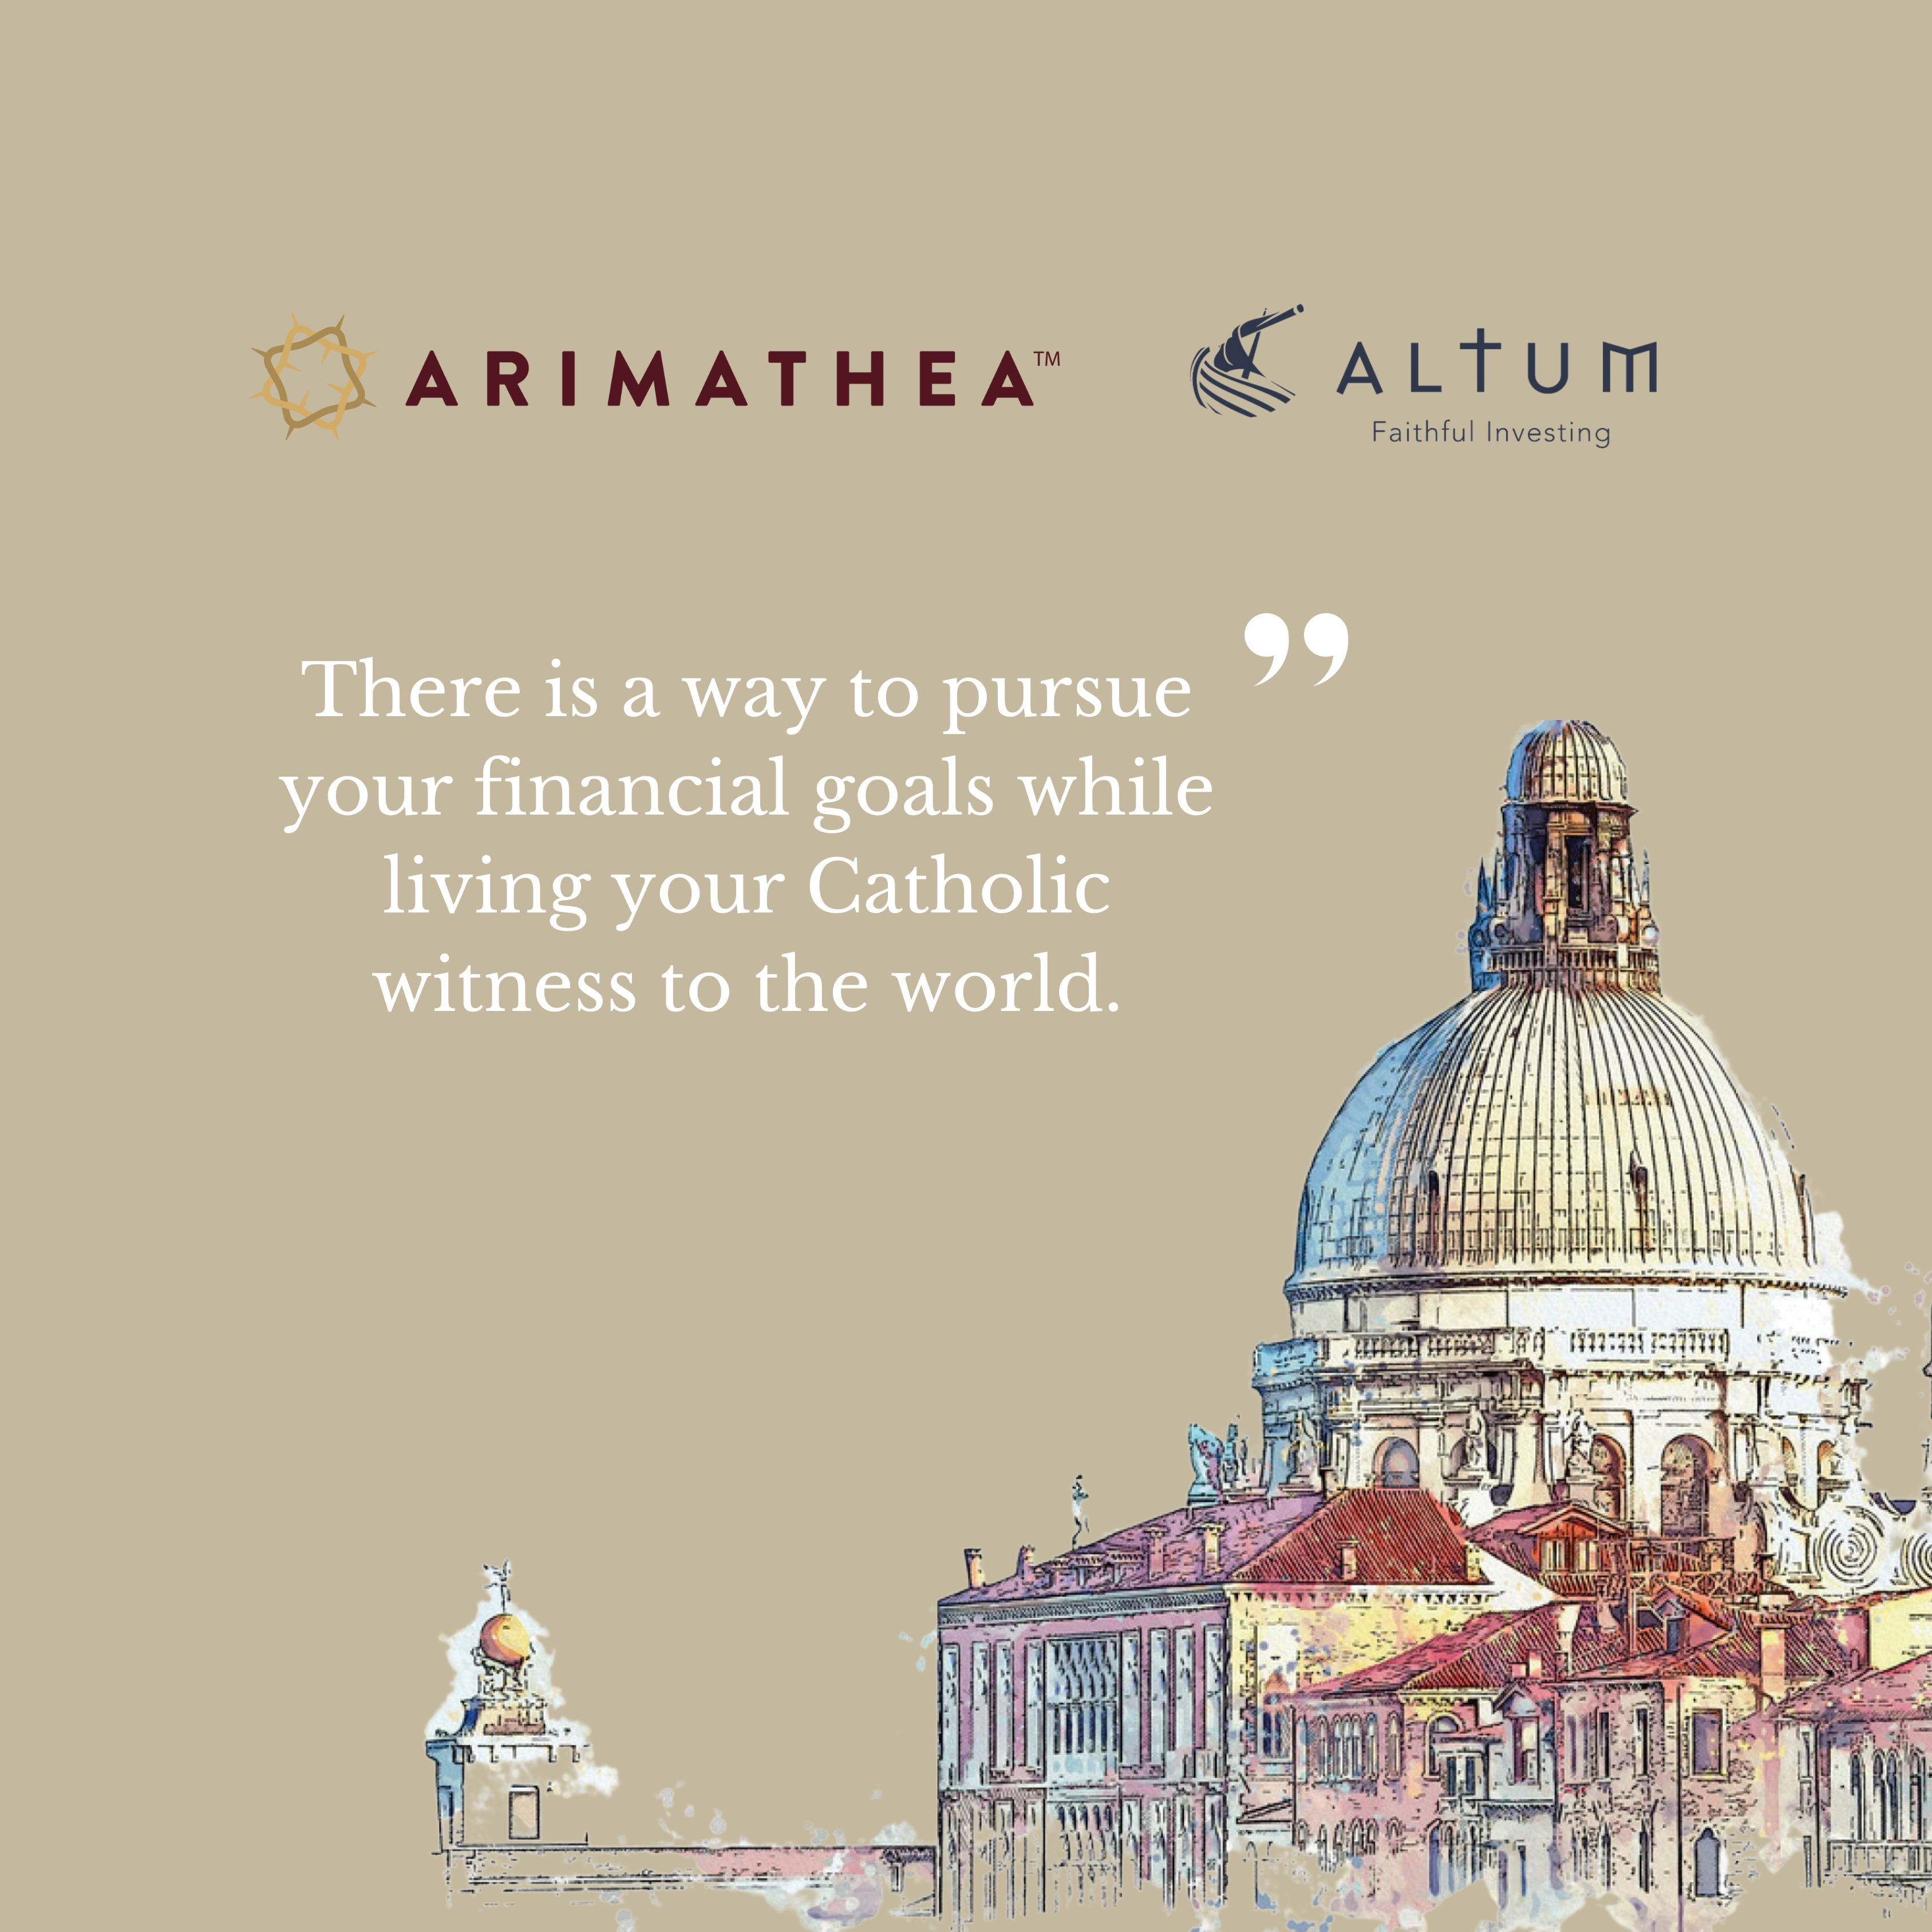 You are currently viewing Altum disembarks in the USA with a new Catholic investment platform: Arimathea.